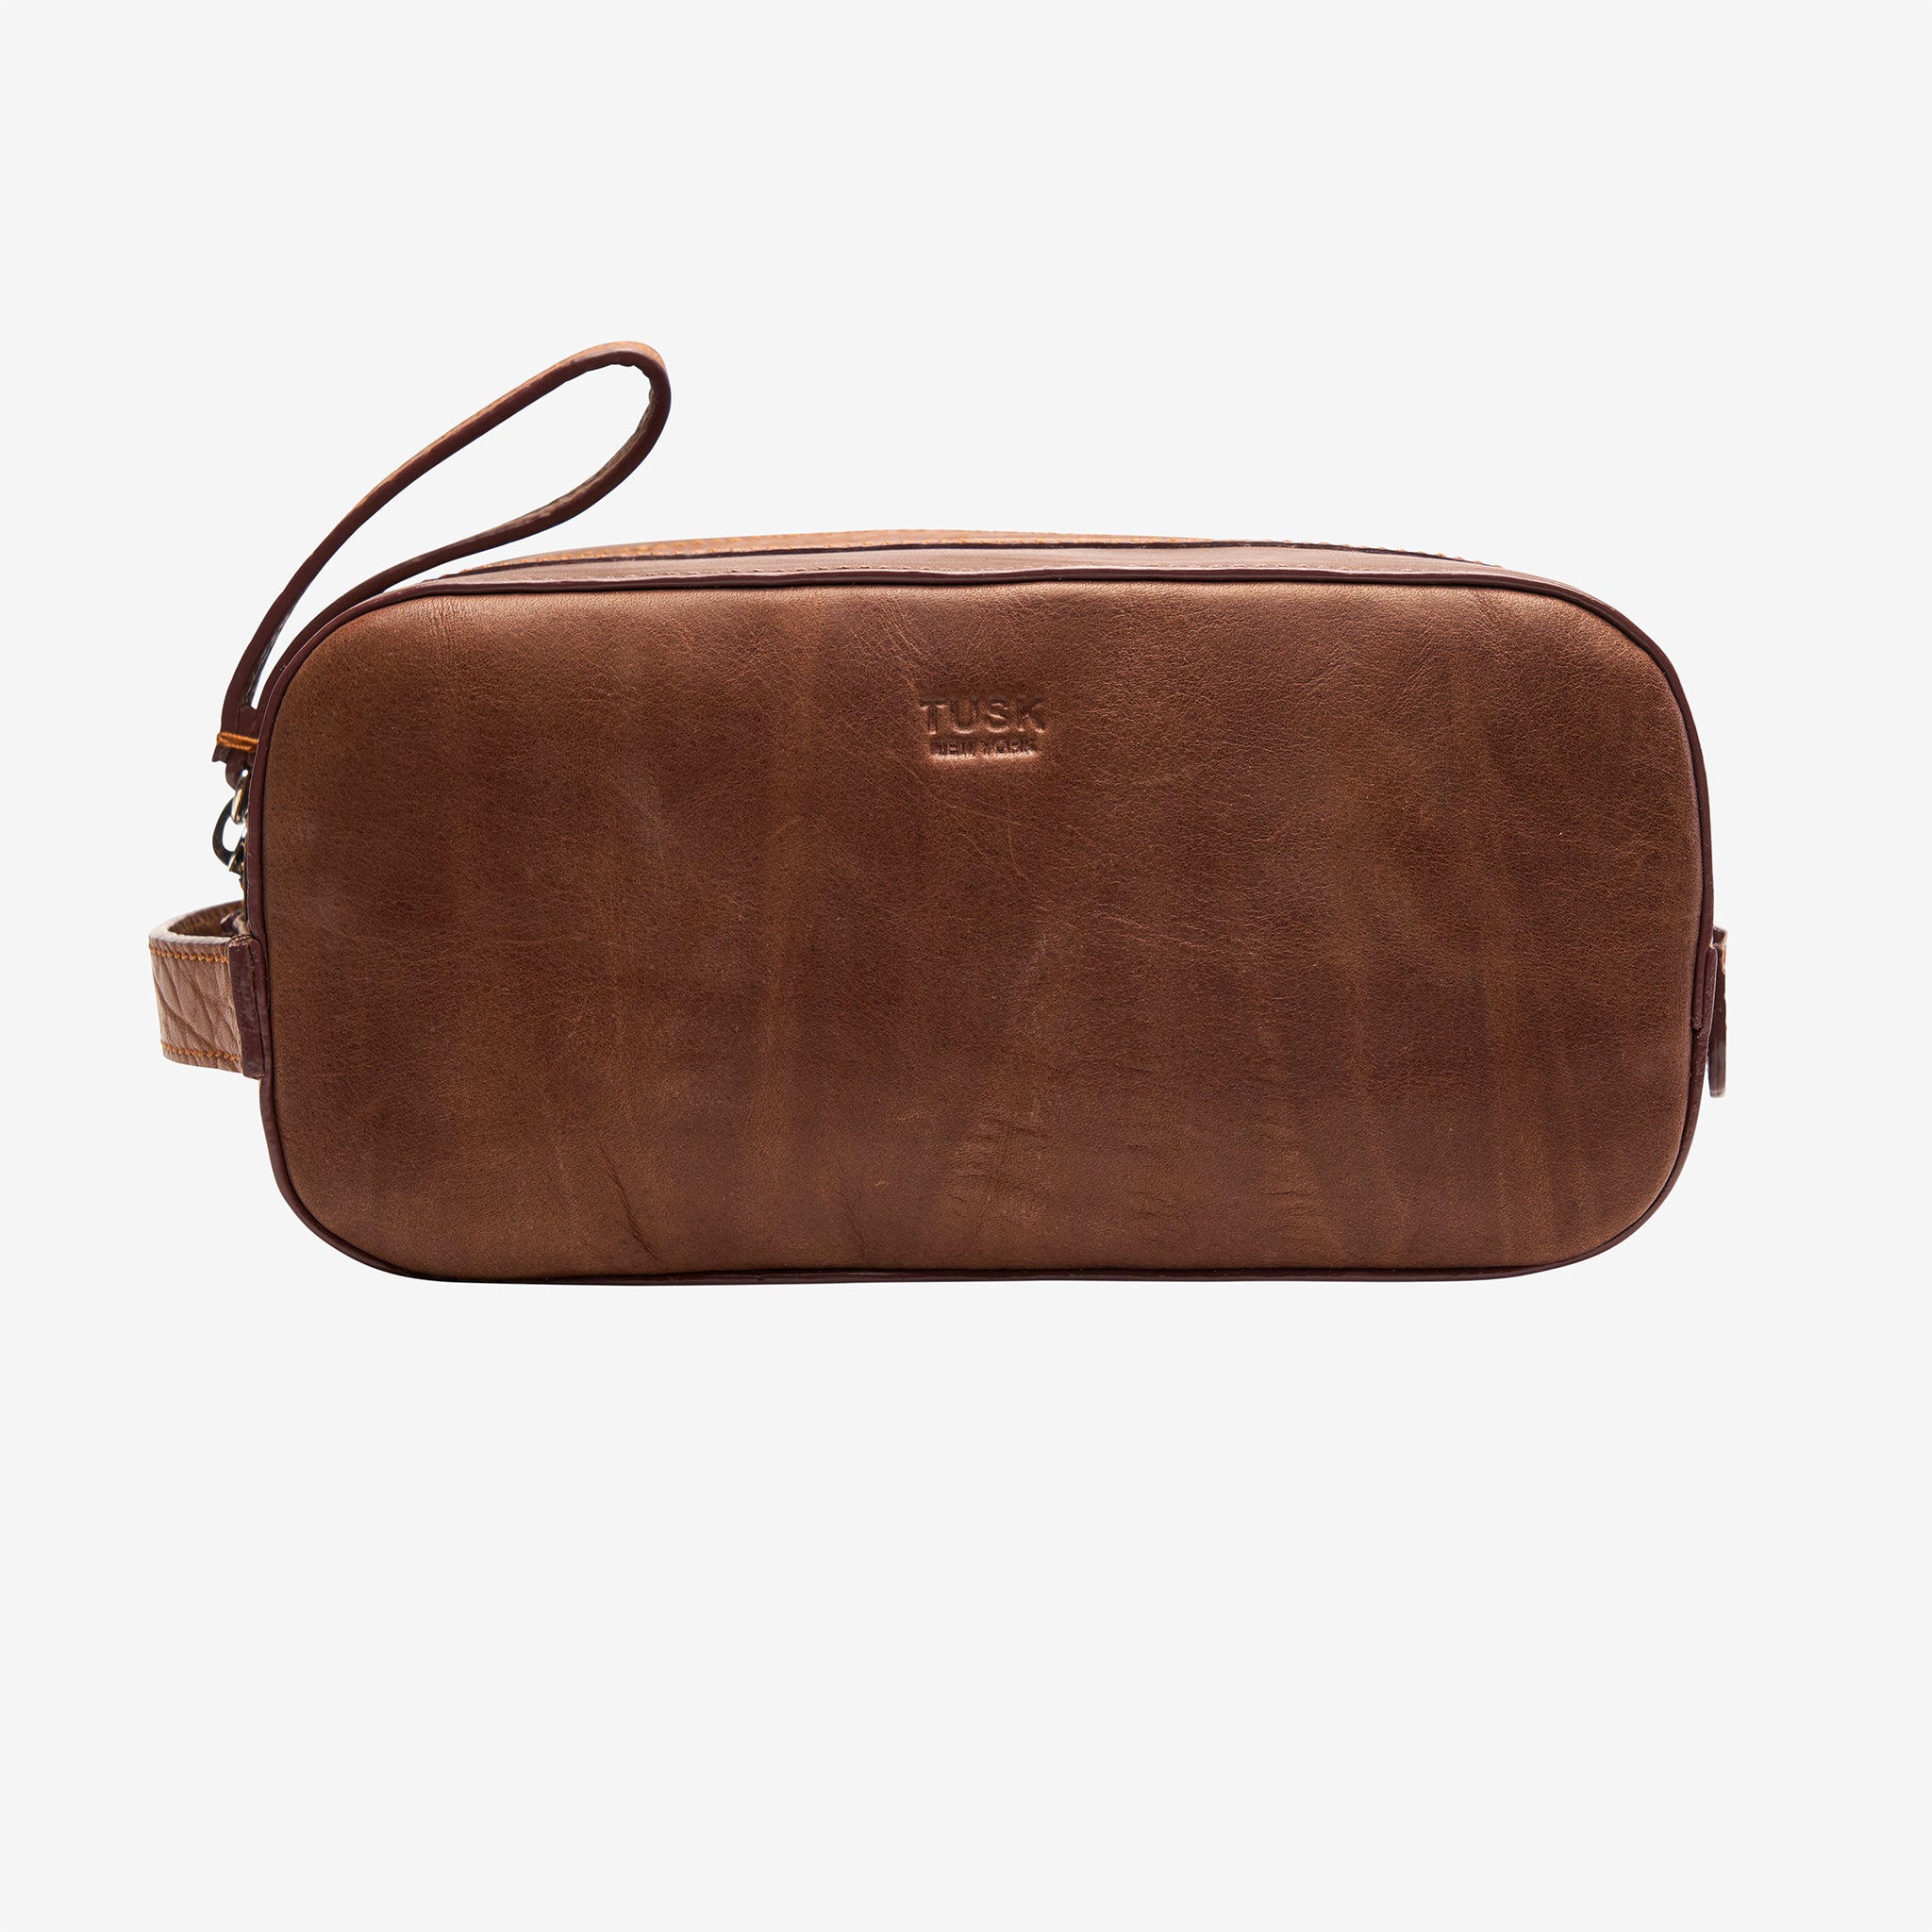    tusk-770-mens-leather-toiletry-case-chocolate-front